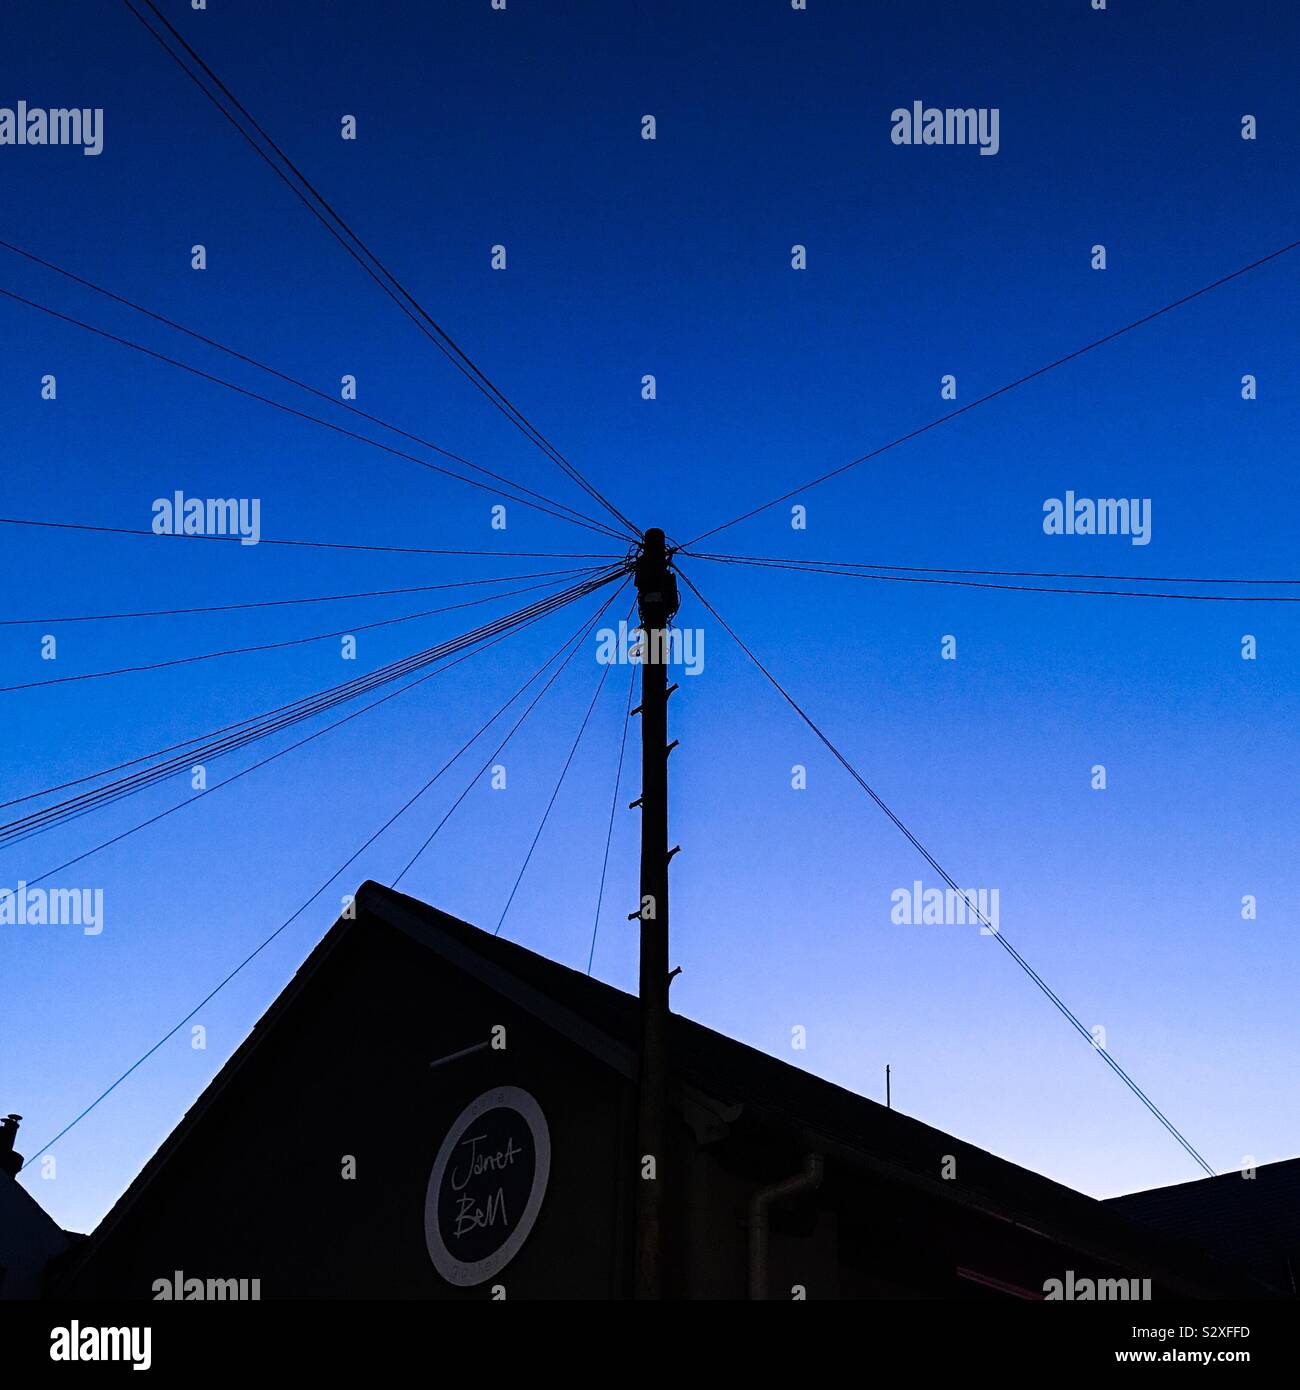 Warm glow of an evening sky in darkening blue above the roof tops and telegraph poles Stock Photo